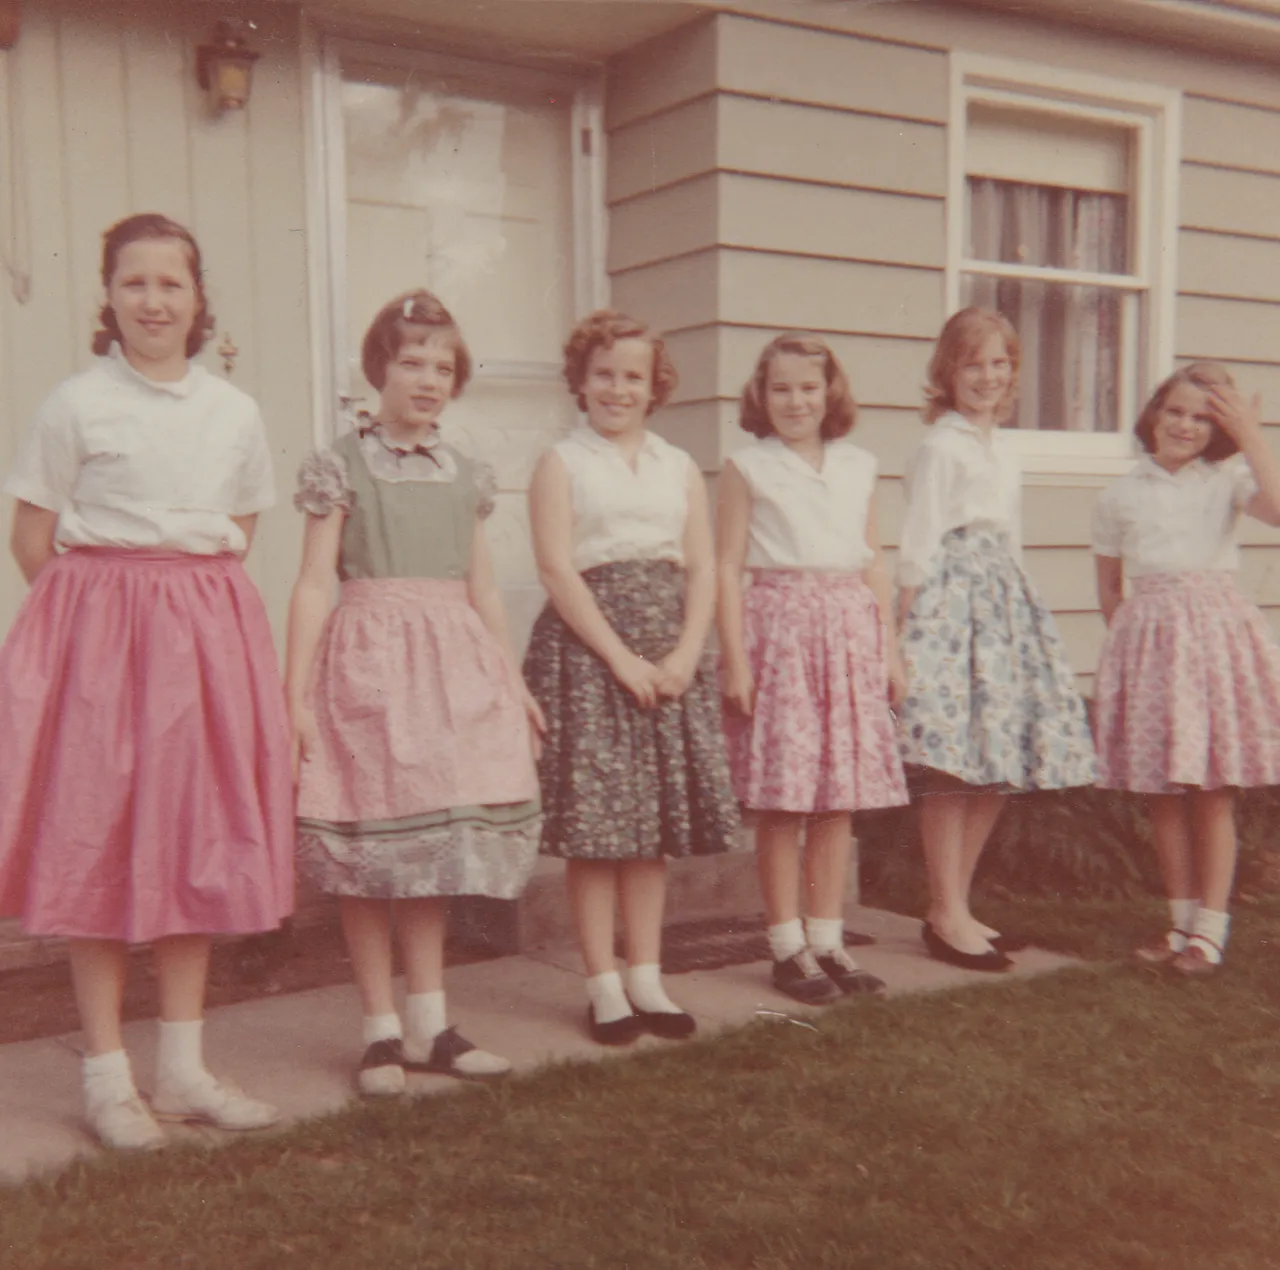 1962-07 - Marilyn Morehead, girls - Cropped.png